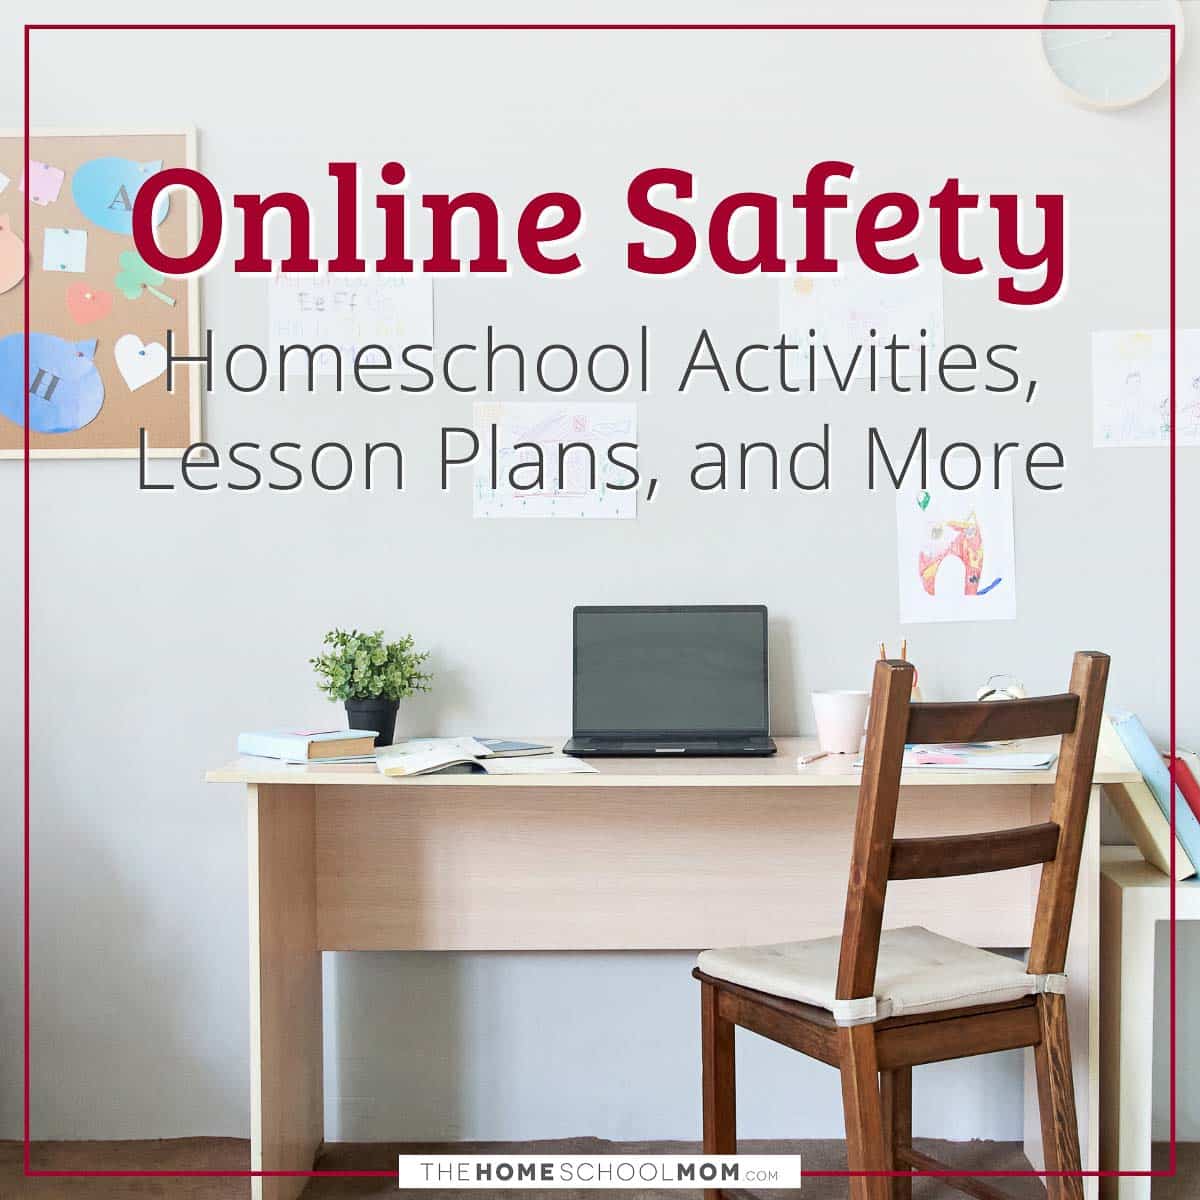 How to Be Safe When Meeting an Online Friend in Person - Homeschooling Teen